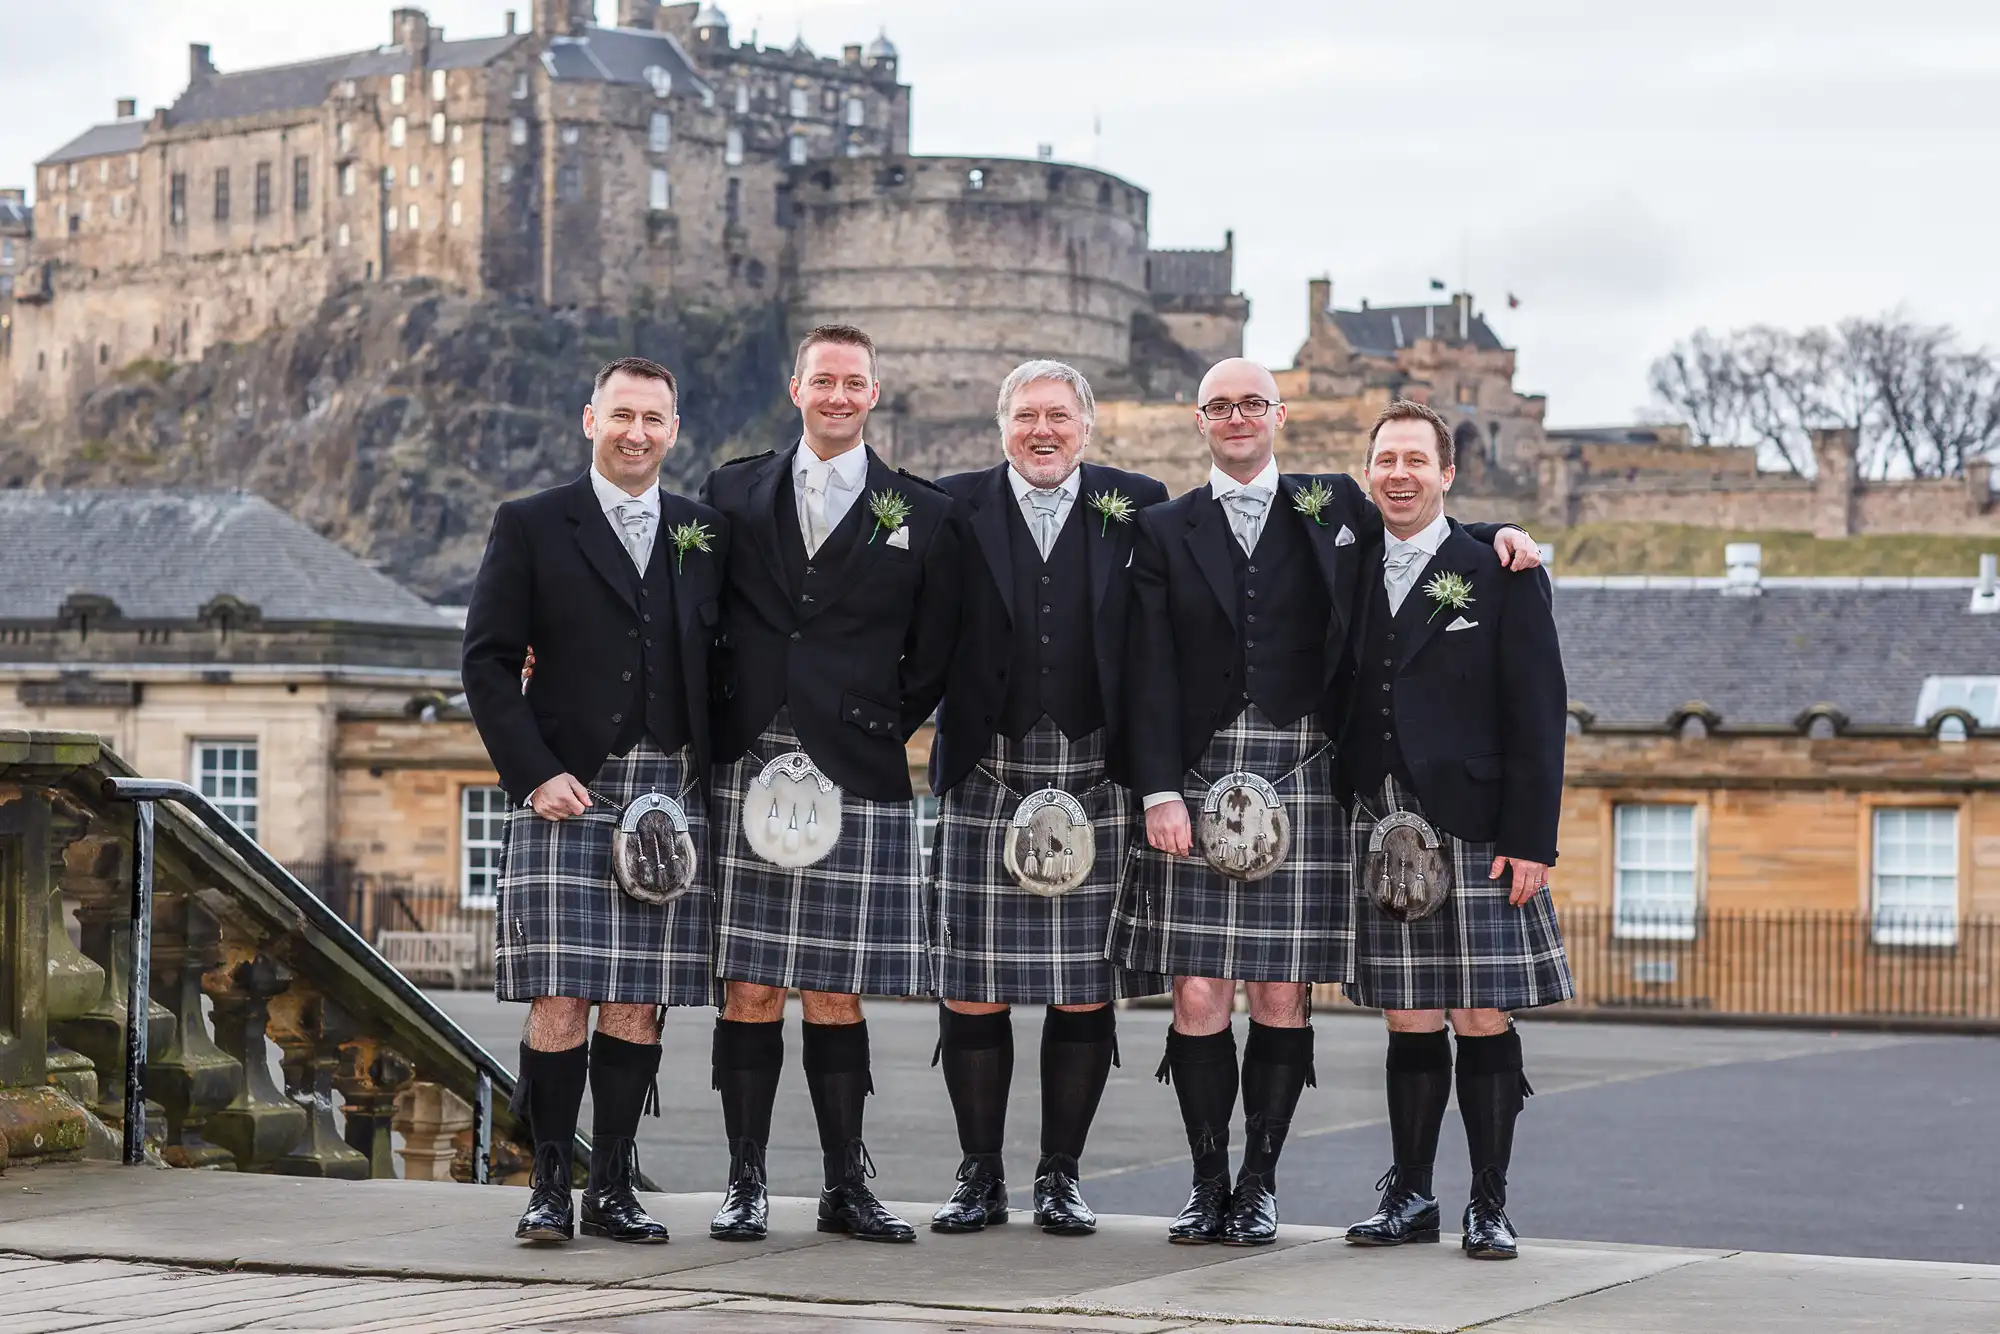 Five men in traditional scottish kilts and formal jackets smiling in front of edinburgh castle.